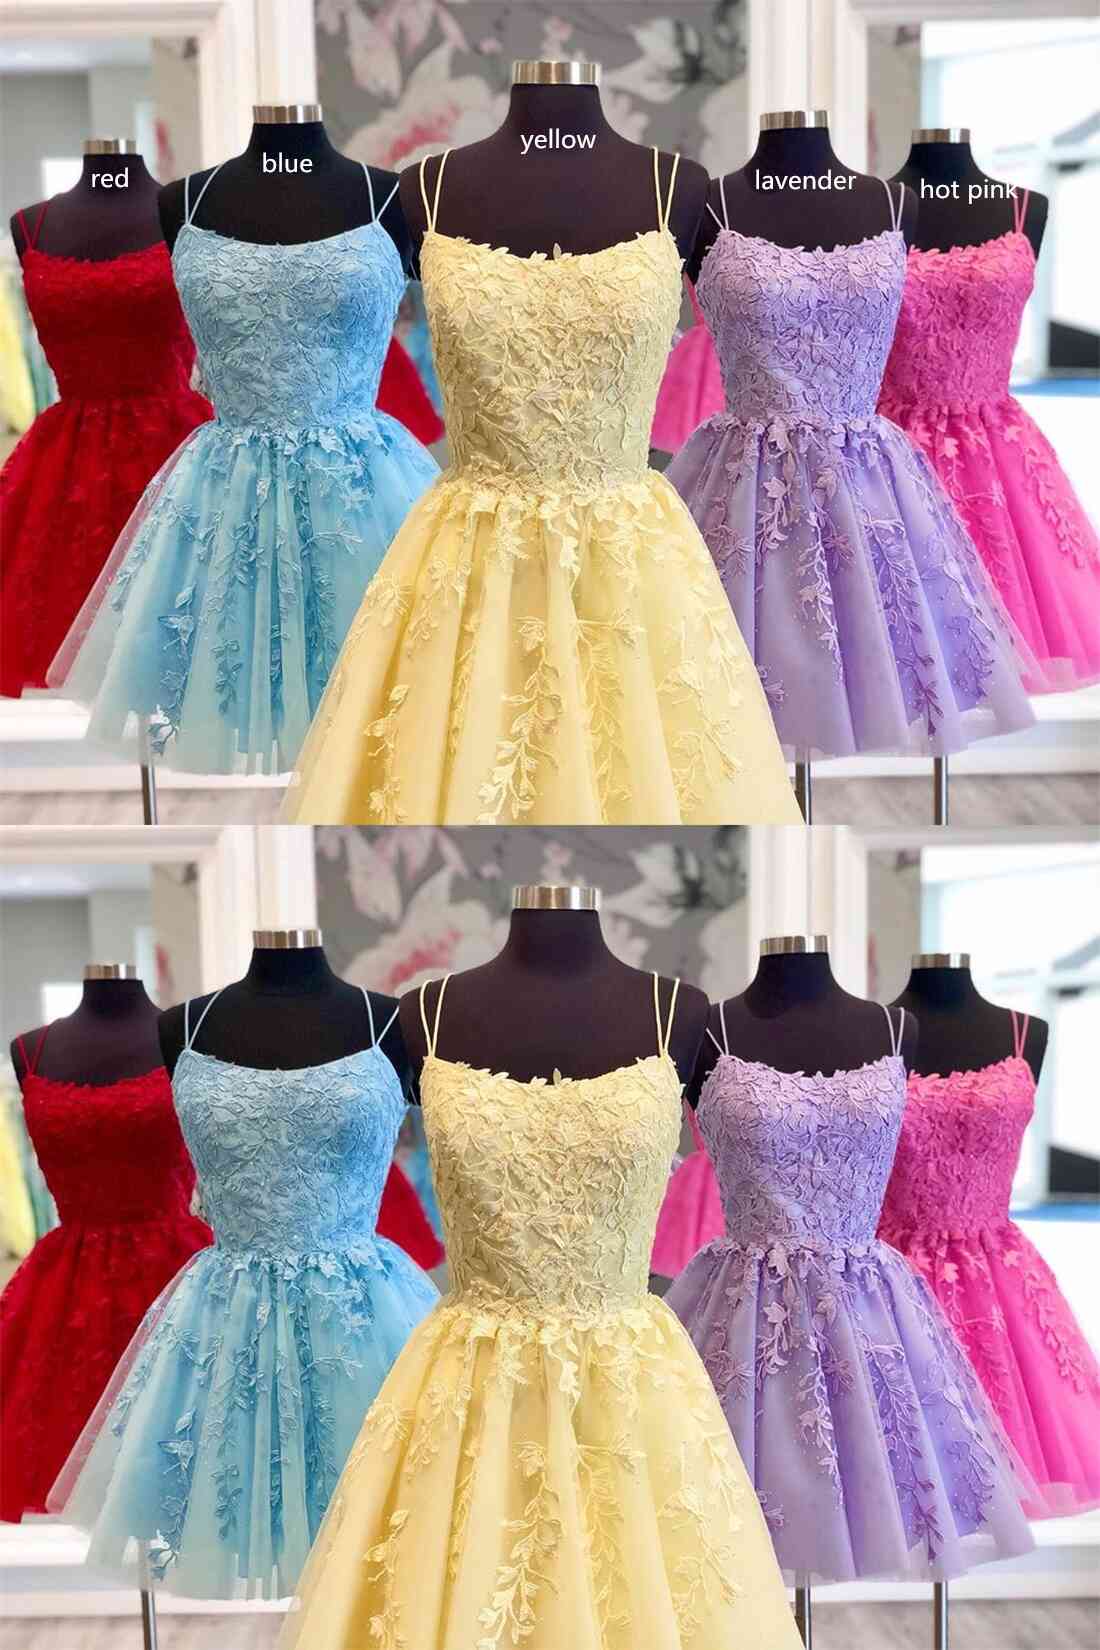 Lace Homecoming Dress, Short Prom Dress ,Winter Formal Dress, Pageant Dance Dresses, Back To School Party Gown, PC0641